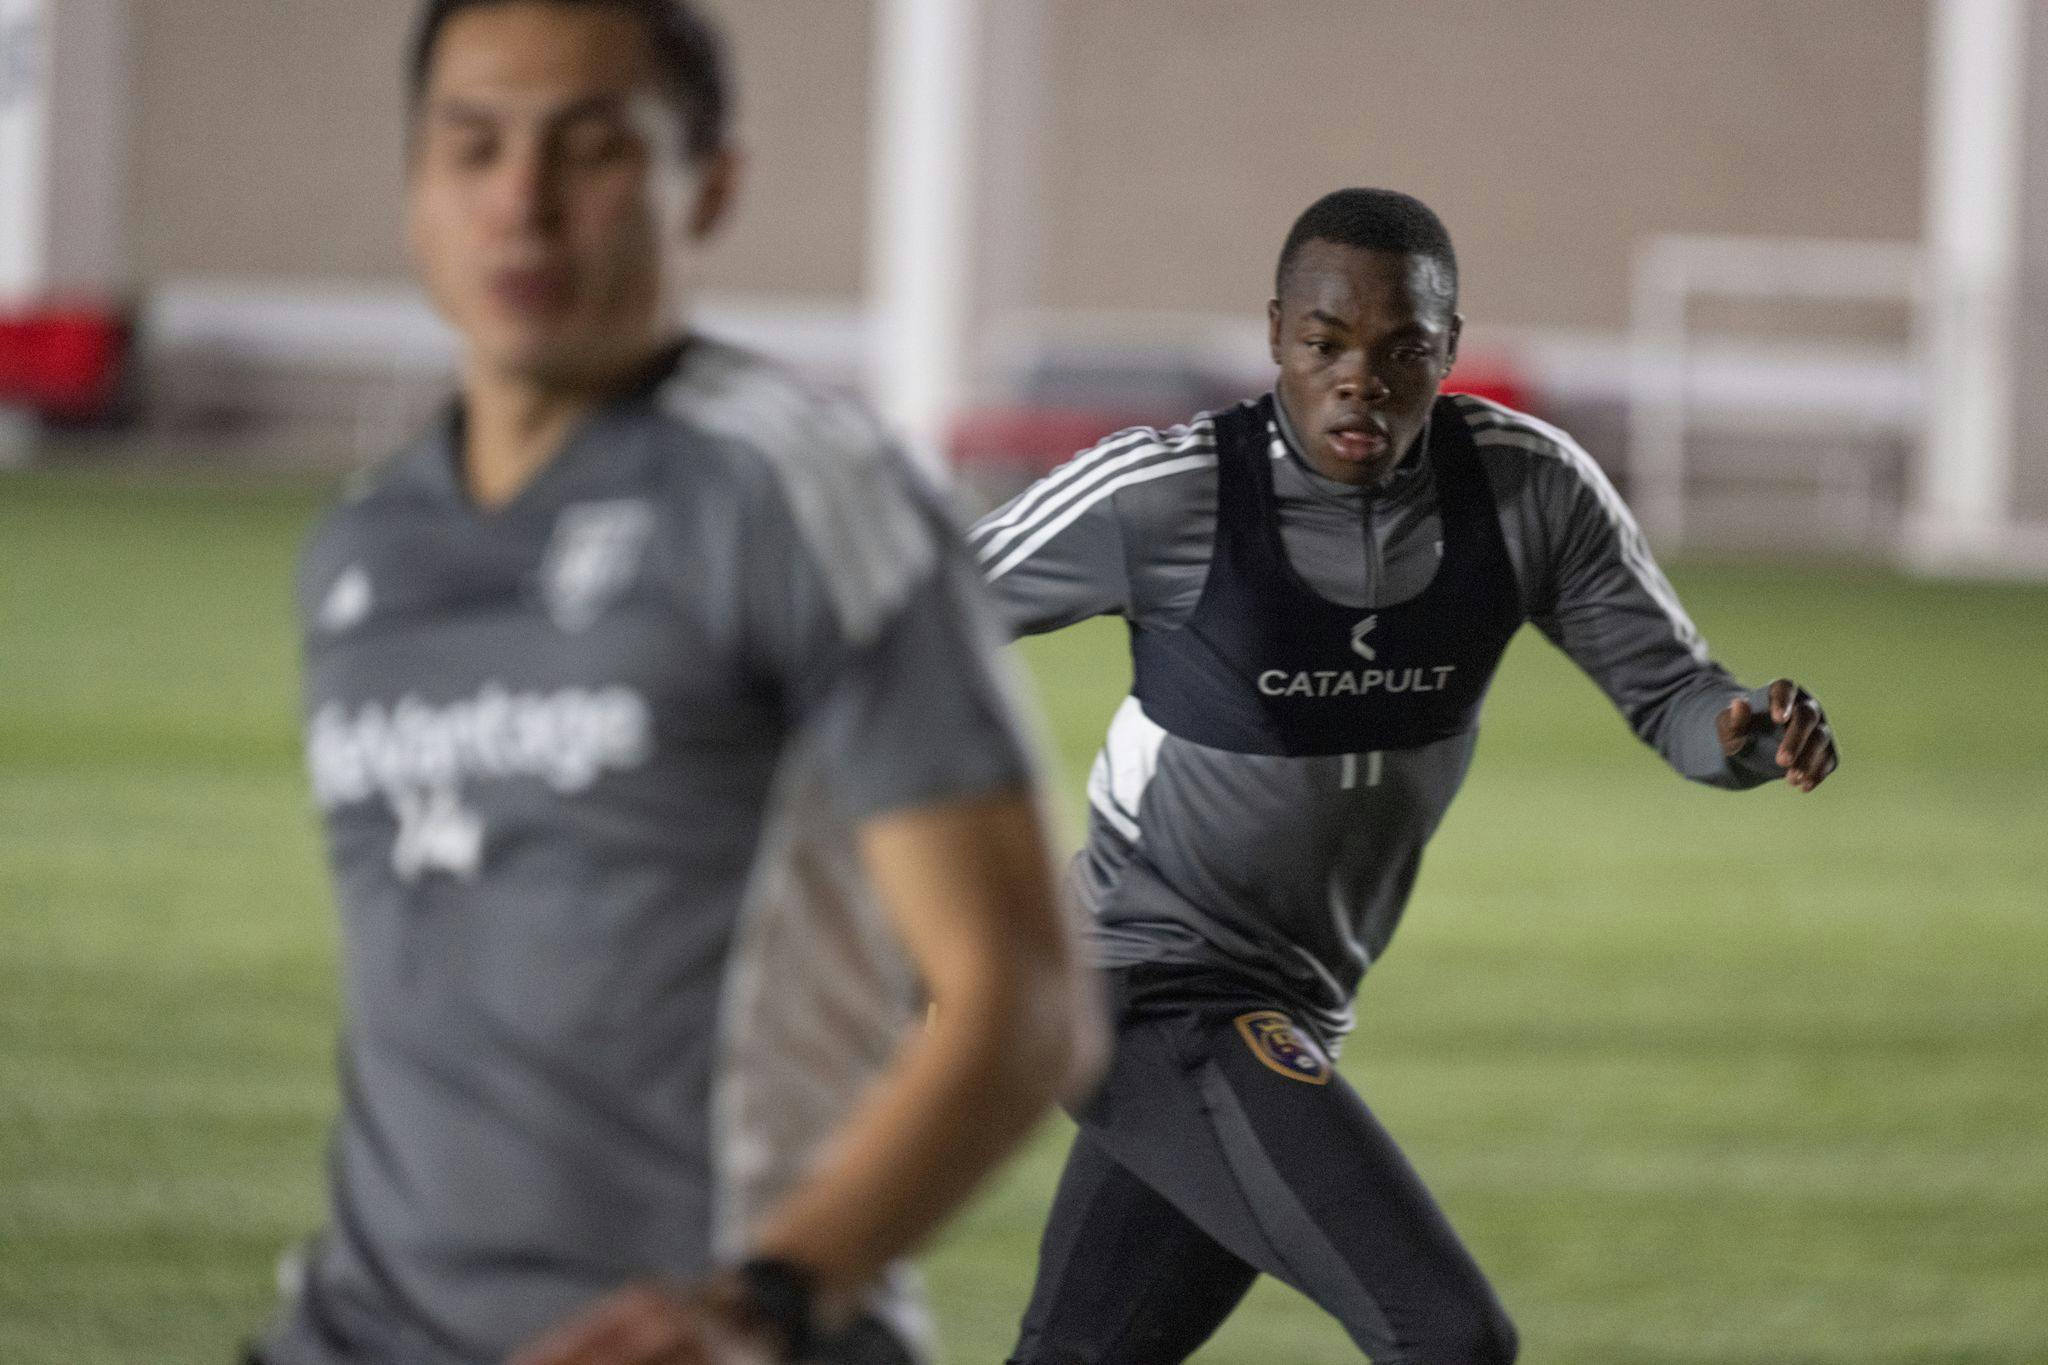 Real Salt Lake player Carlos Andrés Gómez running, with Rubio Rubin out of focus in the foreground.